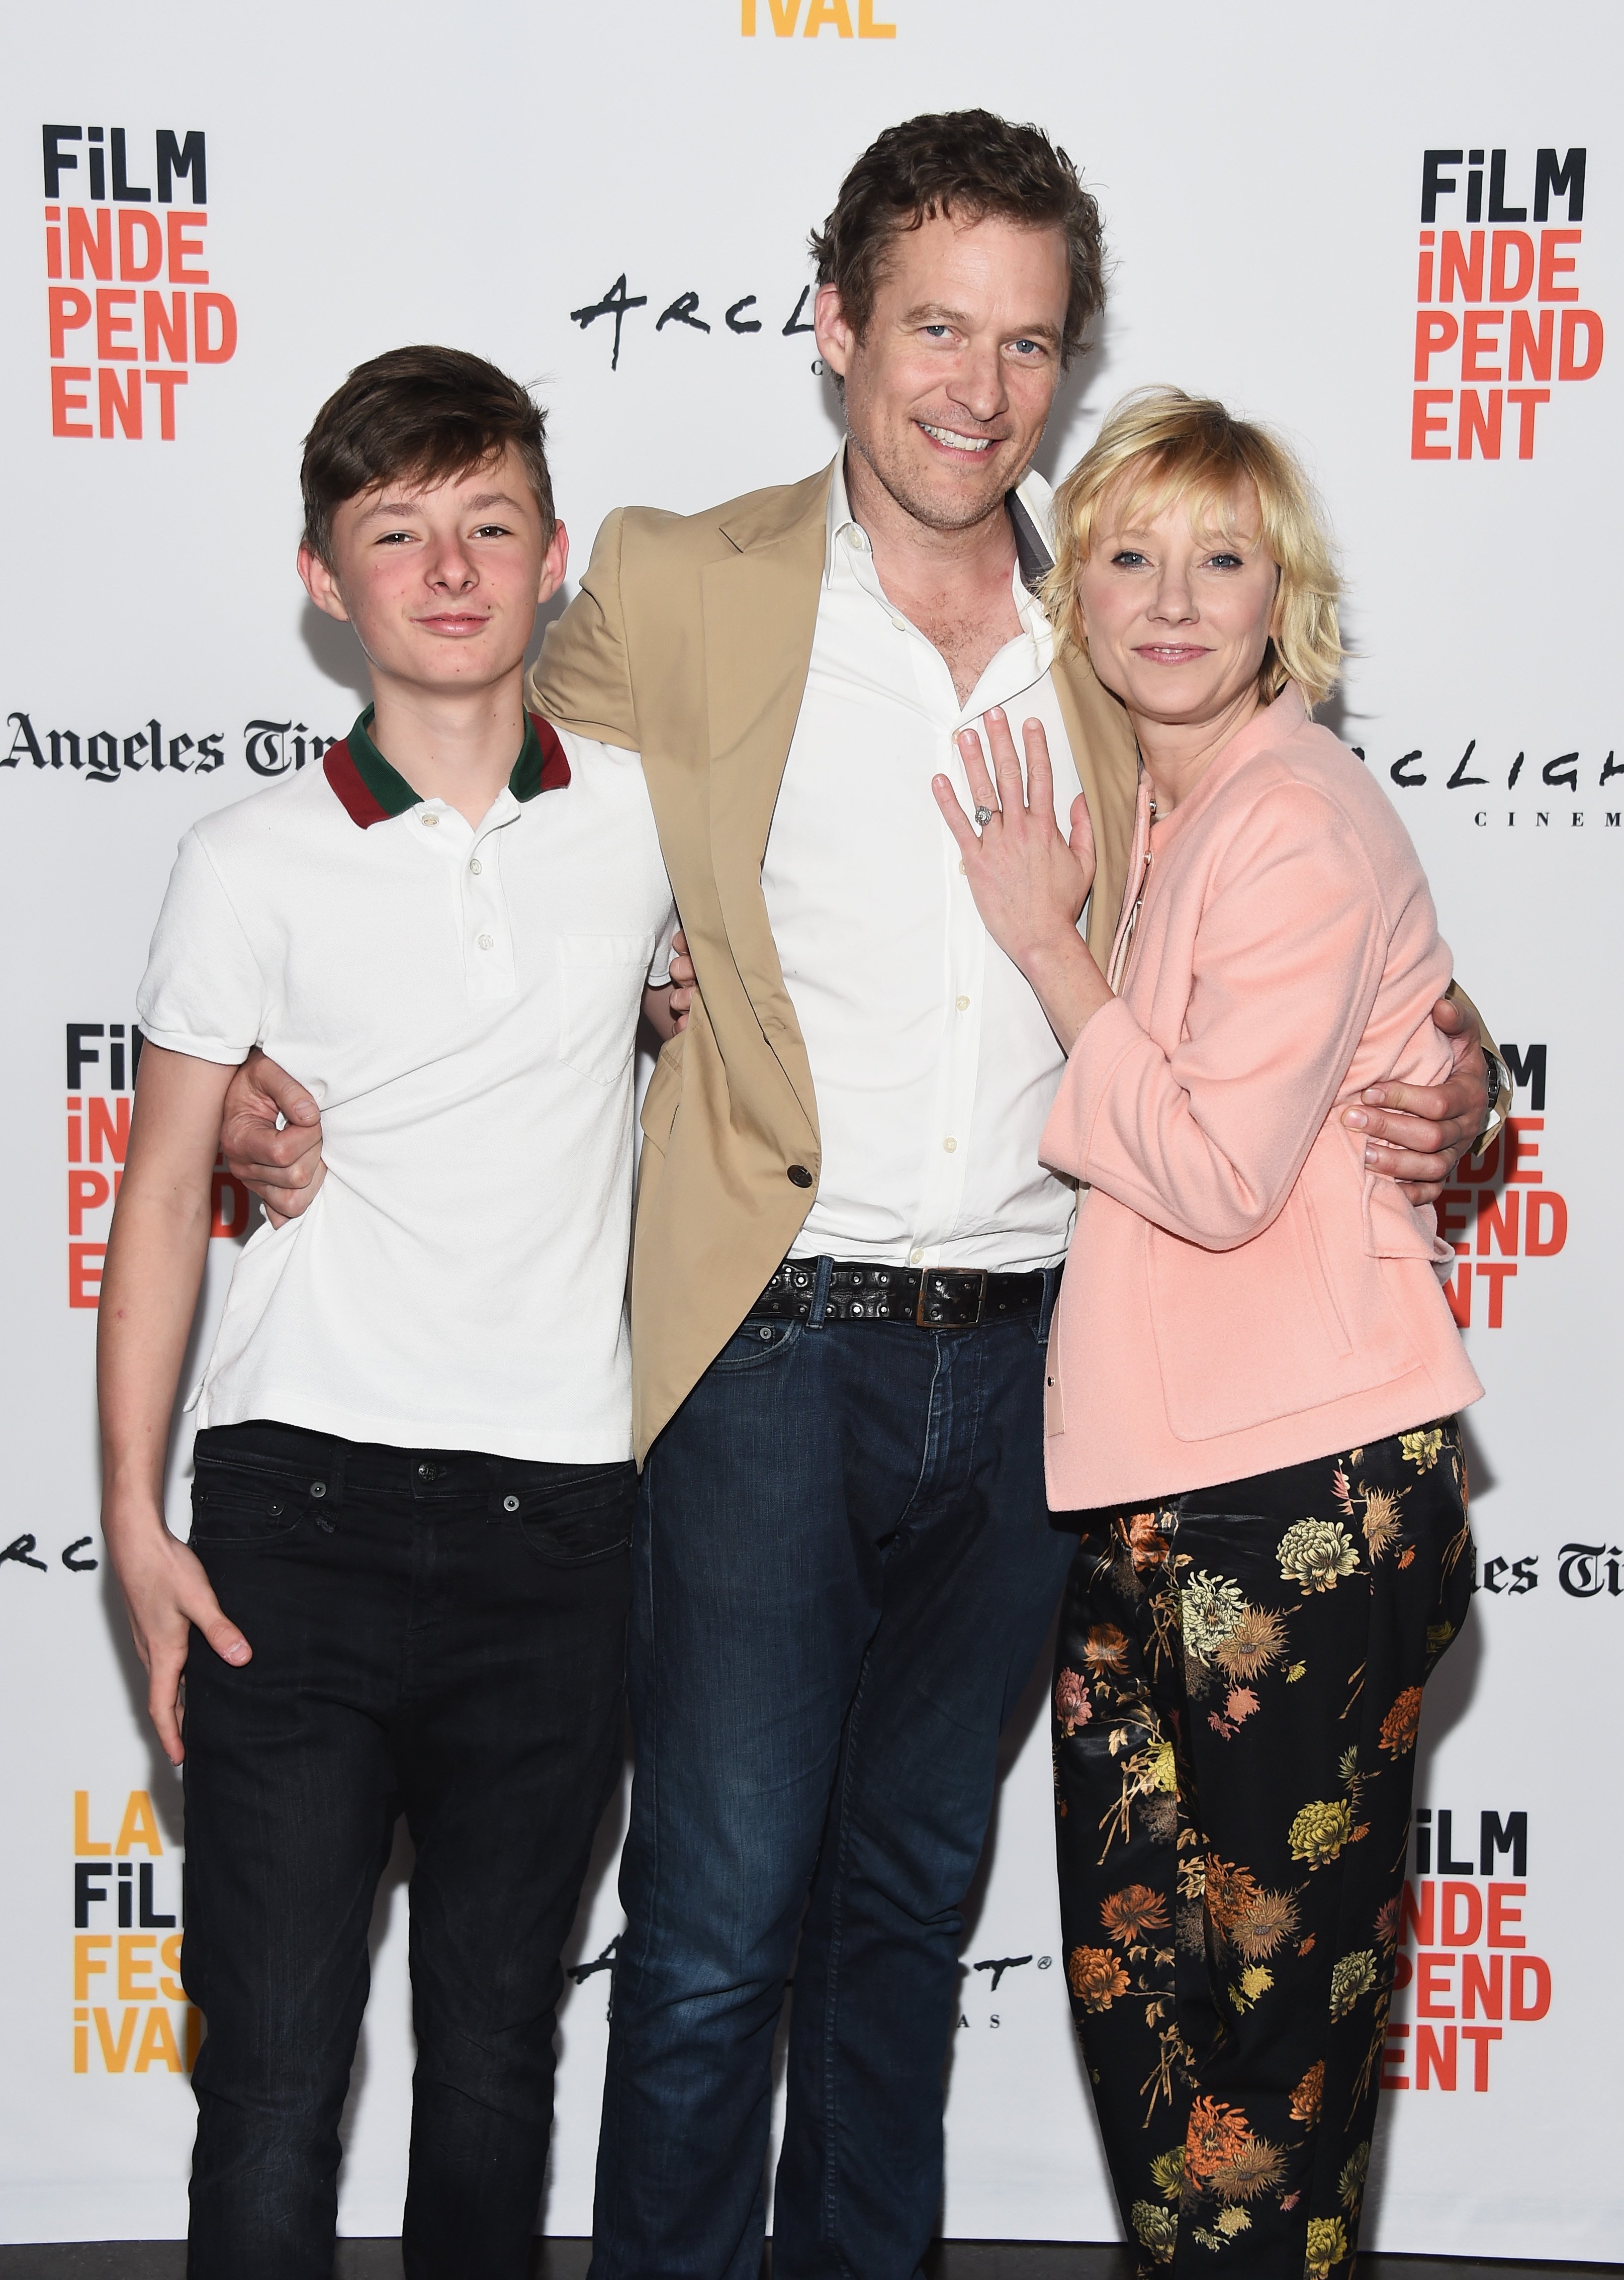 Homer Laffoon, actor James Tupper and actress Anne Heche at the 2017 Los Angeles Film Festival "My Friend Dahmer" premiere held at the ArcLight Santa Monica on June 18, 2017 in Santa Monica, California. | Source: Getty Images